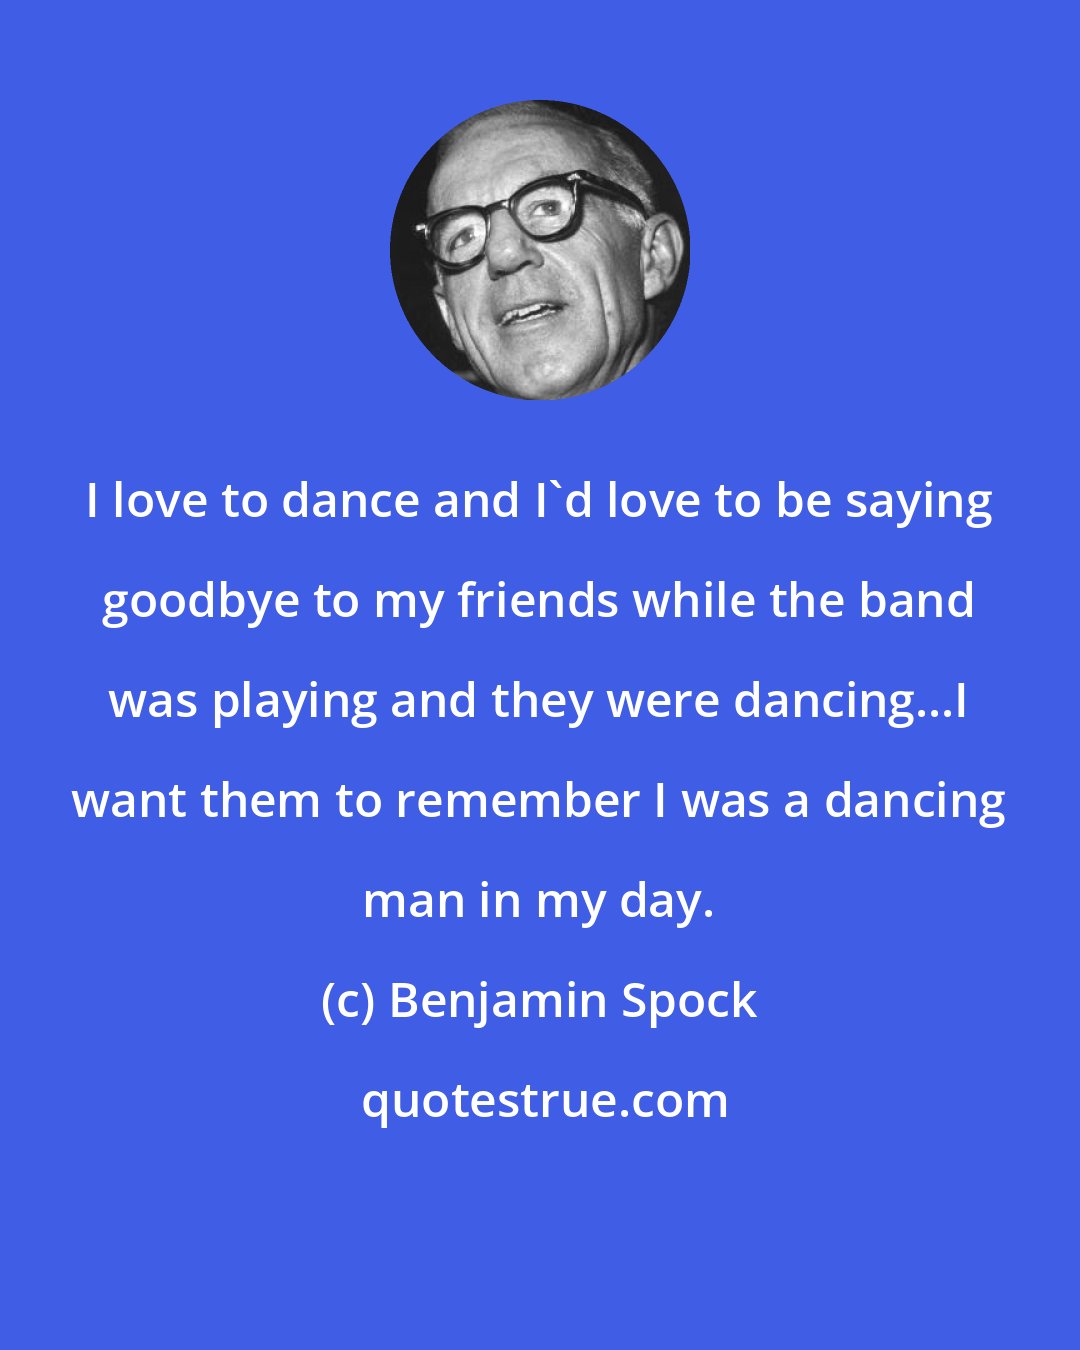 Benjamin Spock: I love to dance and I'd love to be saying goodbye to my friends while the band was playing and they were dancing...I want them to remember I was a dancing man in my day.